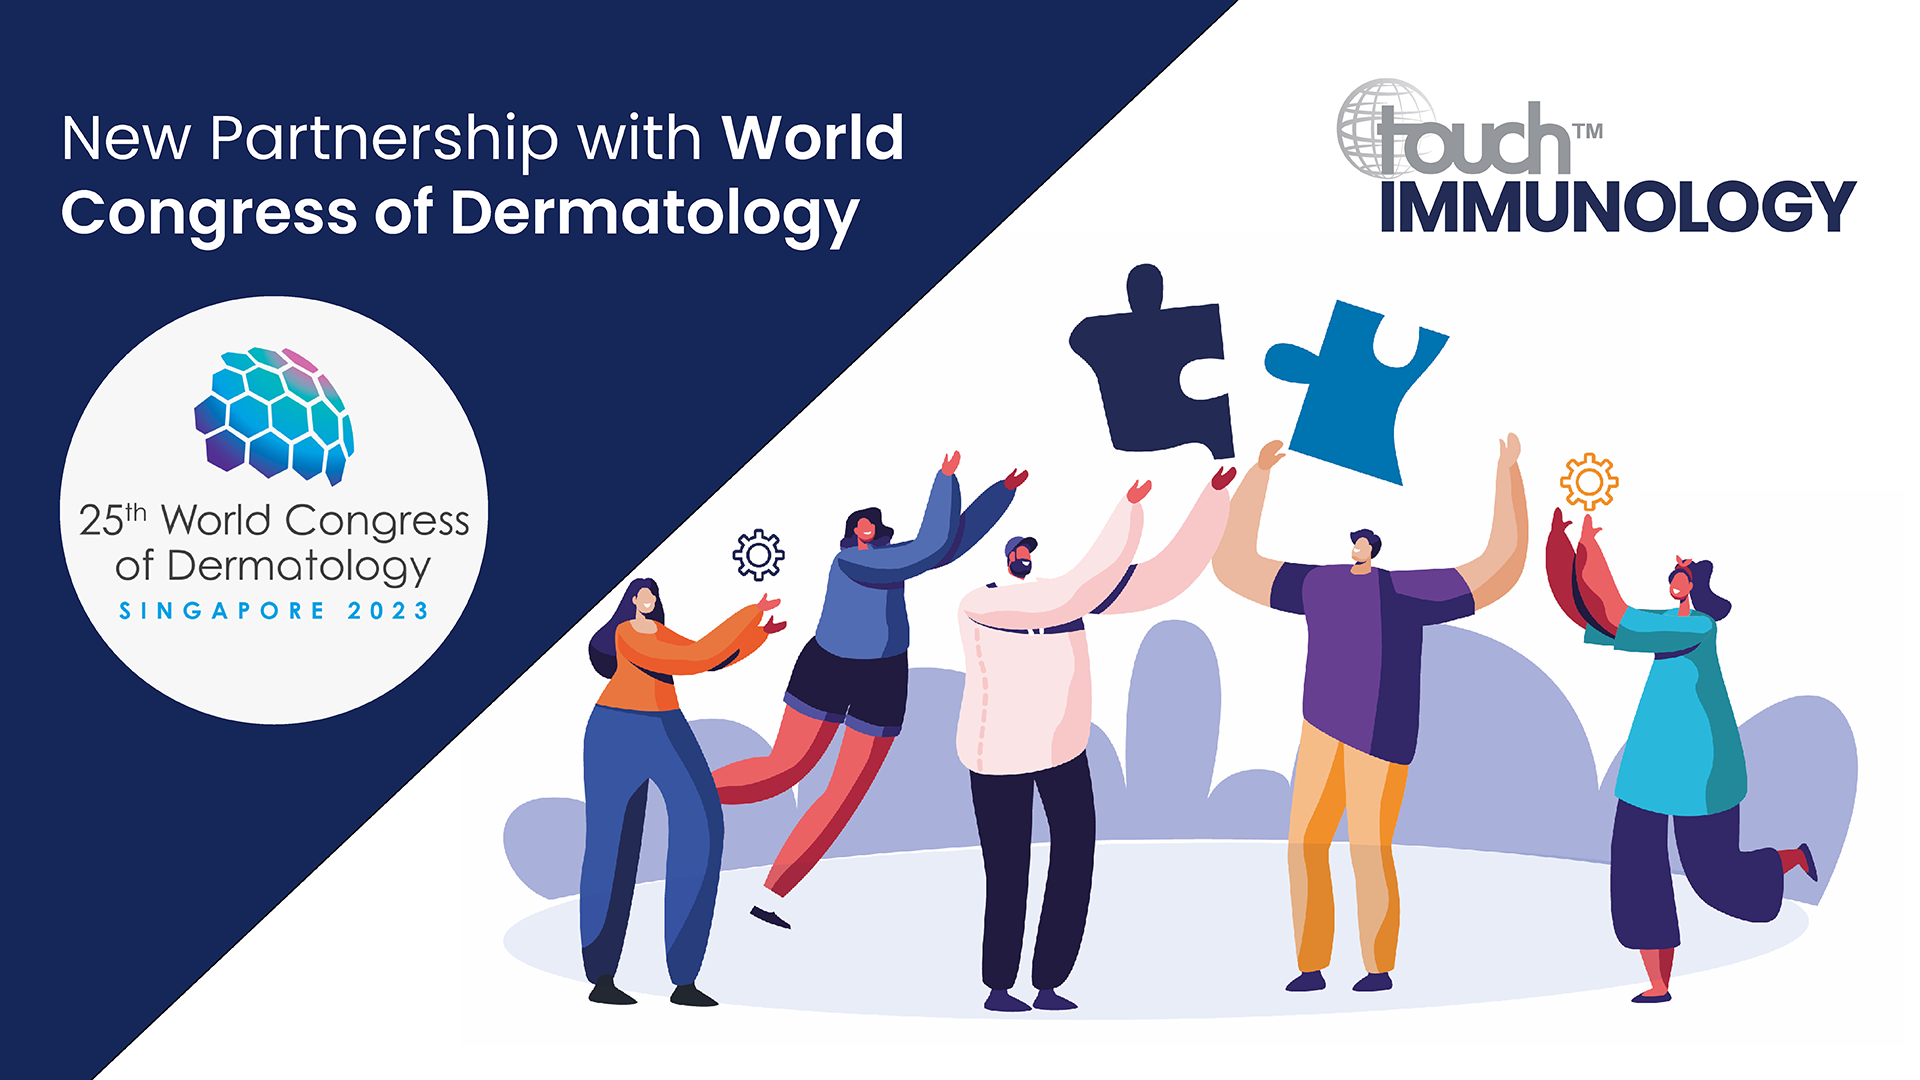 NEW Partnership with World Congress of Dermatology (WCD) touchCORPORATE